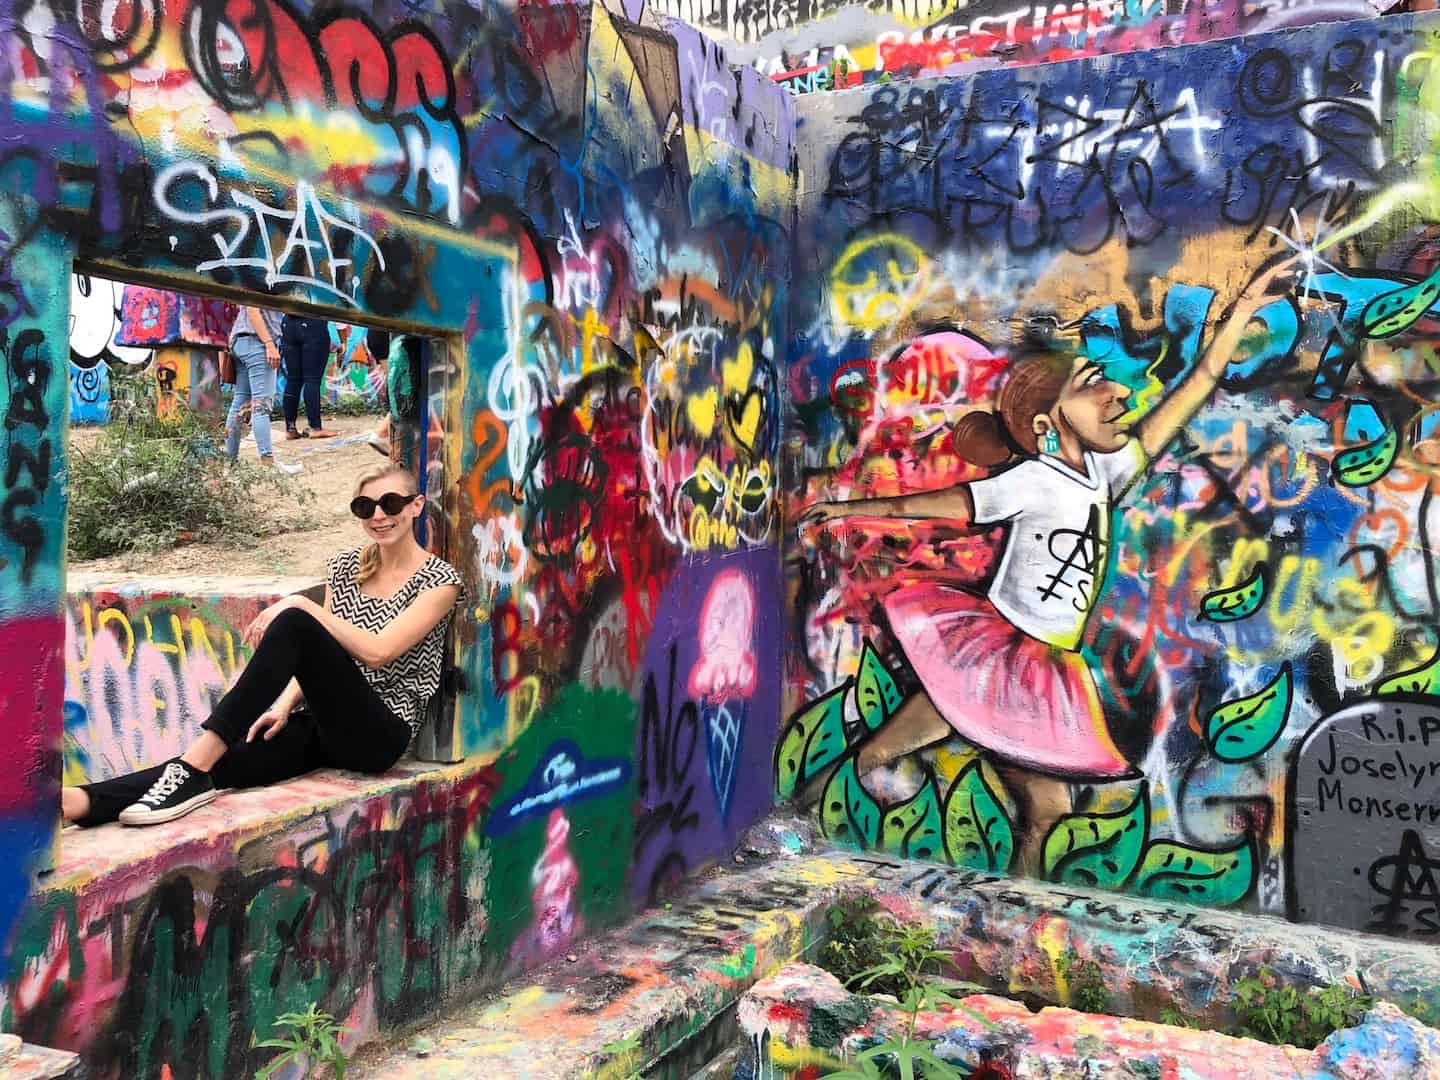 There are plenty of reasons to love Austin (including street art in Austin!). Read on for more features that make this laid-back city great for Texas travel! To & Fro Fam